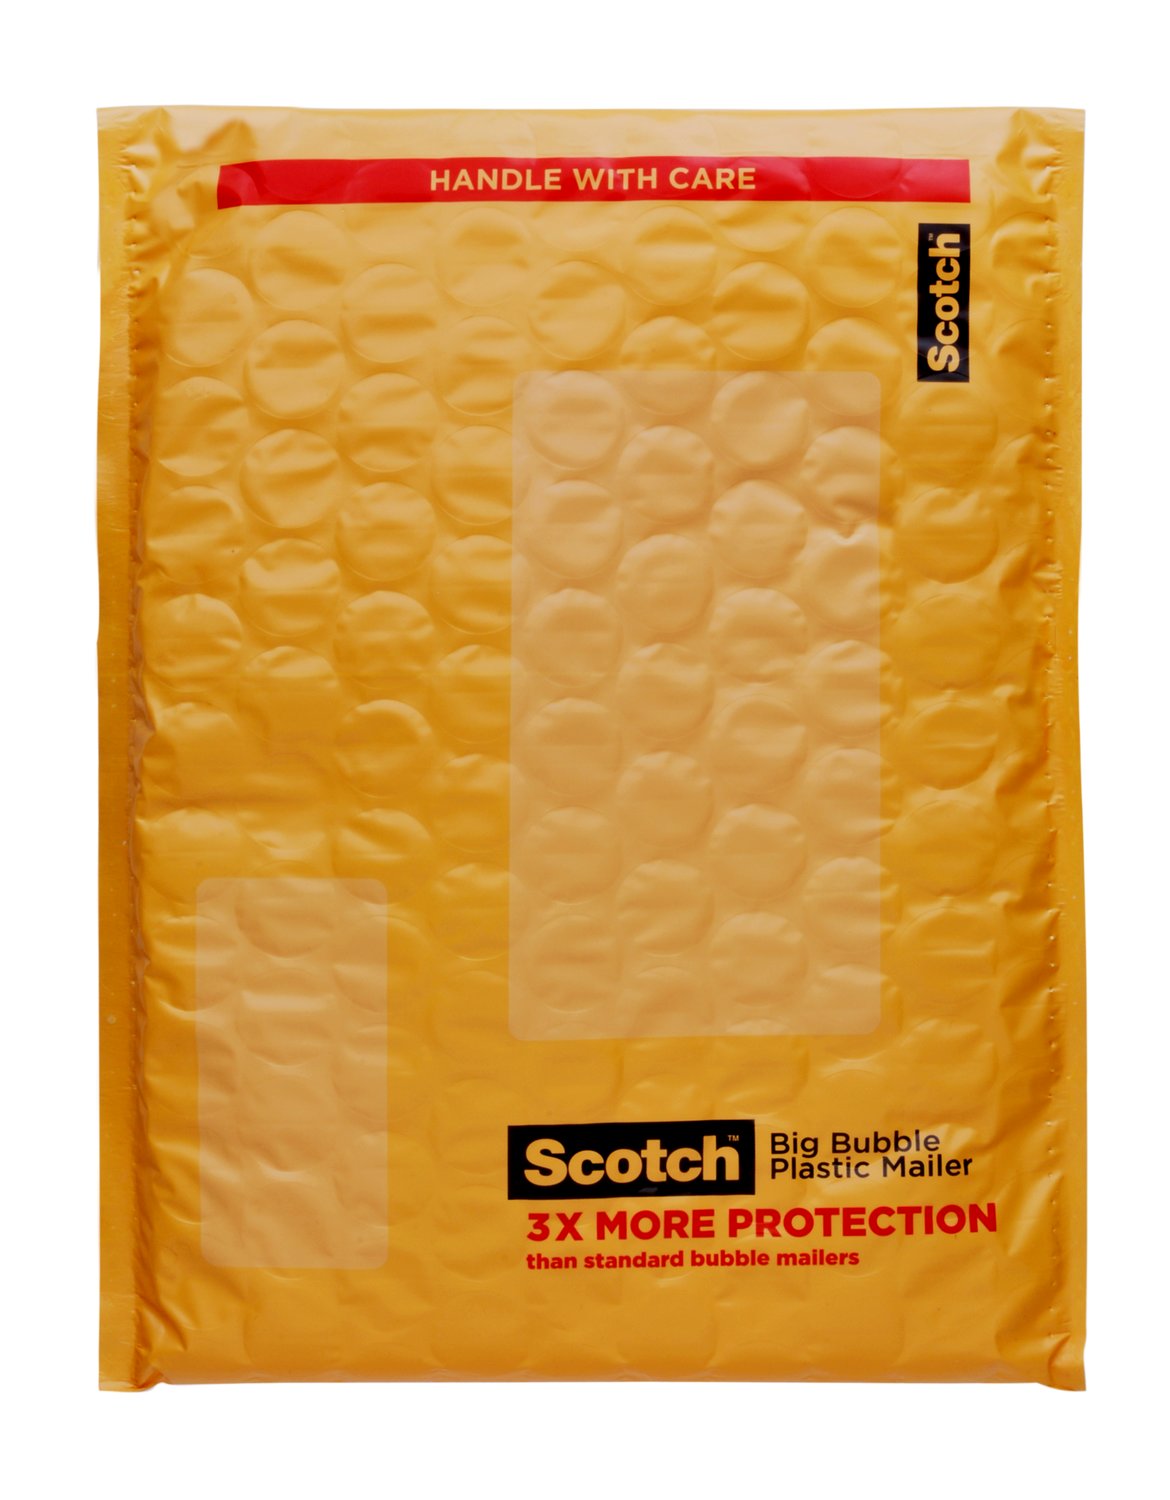 7010292621 - Scotch Big Bubble Plastic Mailer BB8915-48, 10.5 in x 15.25 in,
4/Inner, 12 Inners/Case, 48/1